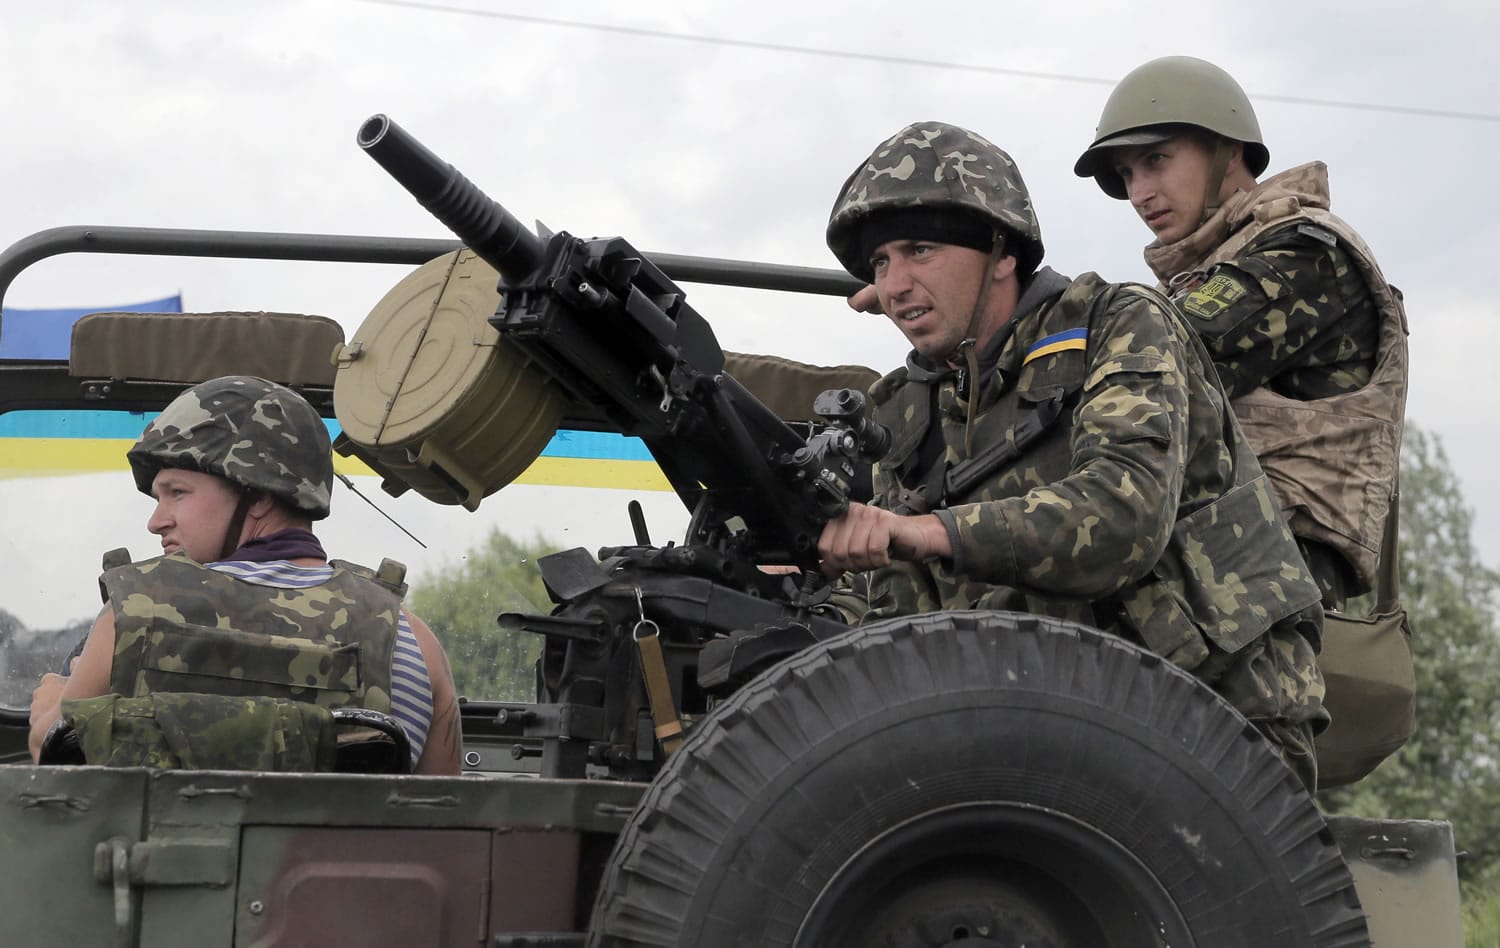 Ukrainian soldiers prepare to shoot a grenade launcher Saturday during a battle with pro-Russian separatist fighters in Slovyansk, Ukraine.